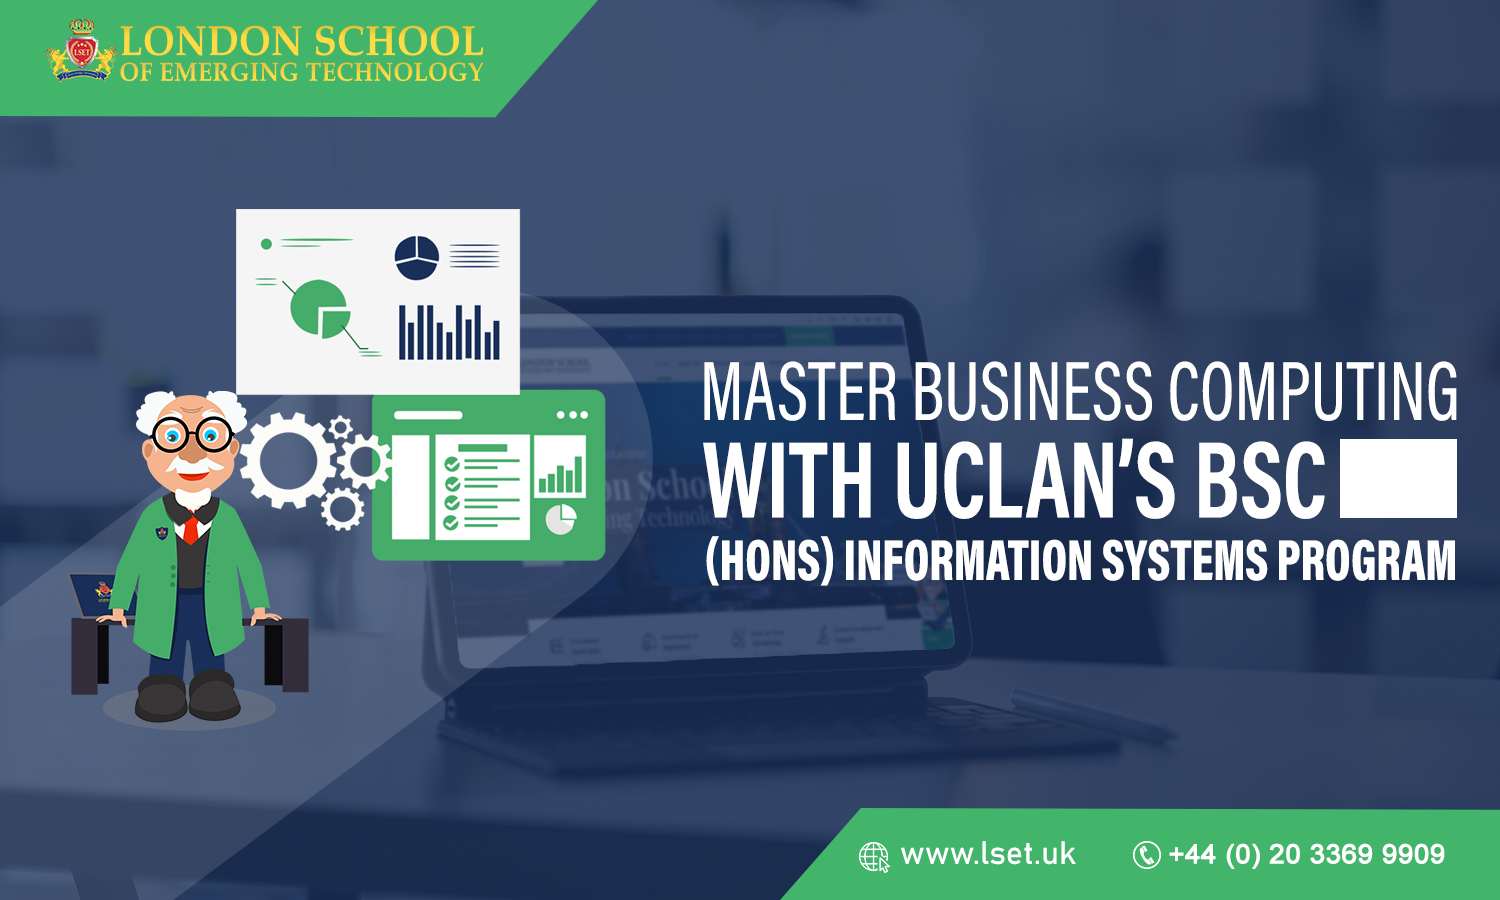 Master Business Computing with UCLan’s BSc (Hons) Information Systems Program